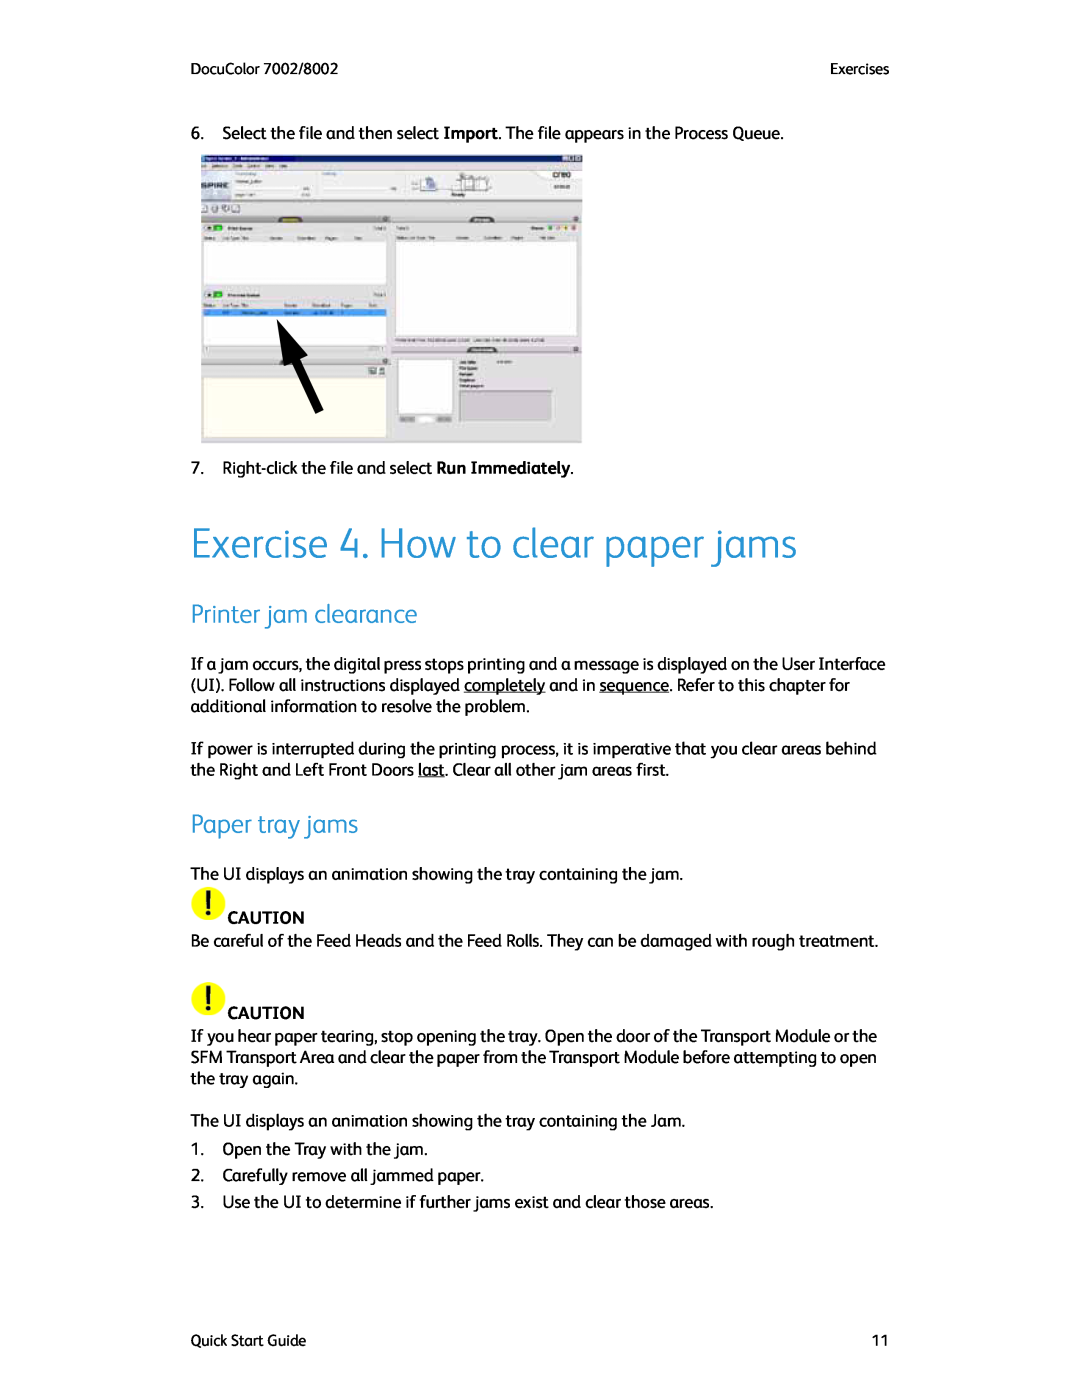 Xerox 8002, 7002 manual Exercise 4. How to clear paper jams, Printer jam clearance, Paper tray jams 